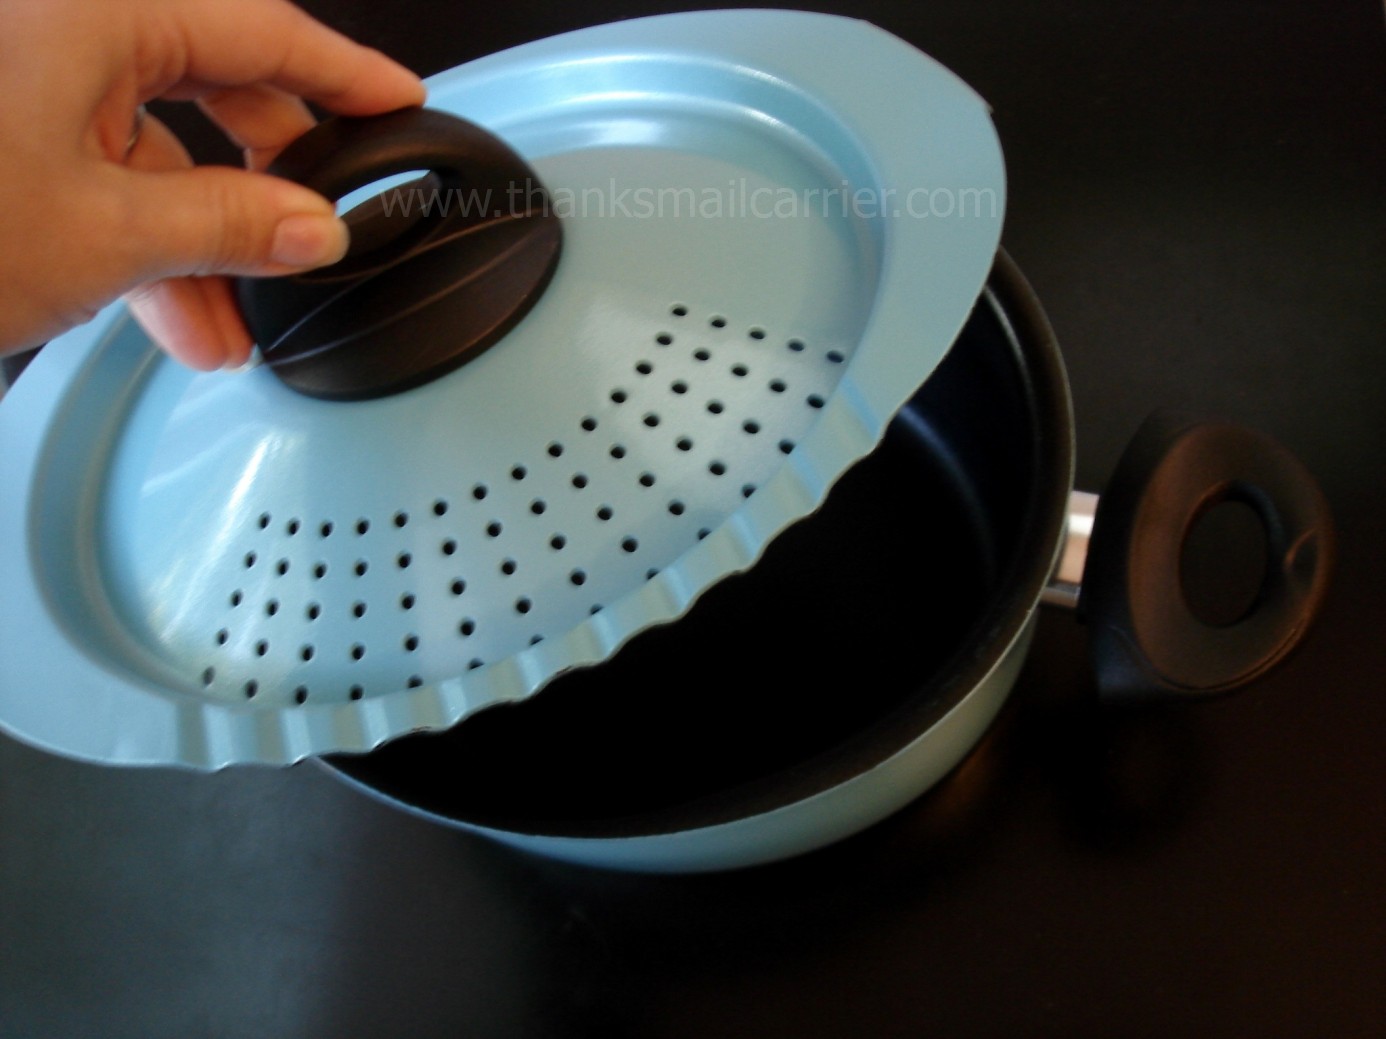 Thanks, Mail Carrier: Bialetti Trends Pasta Pot {Review & Giveaway}